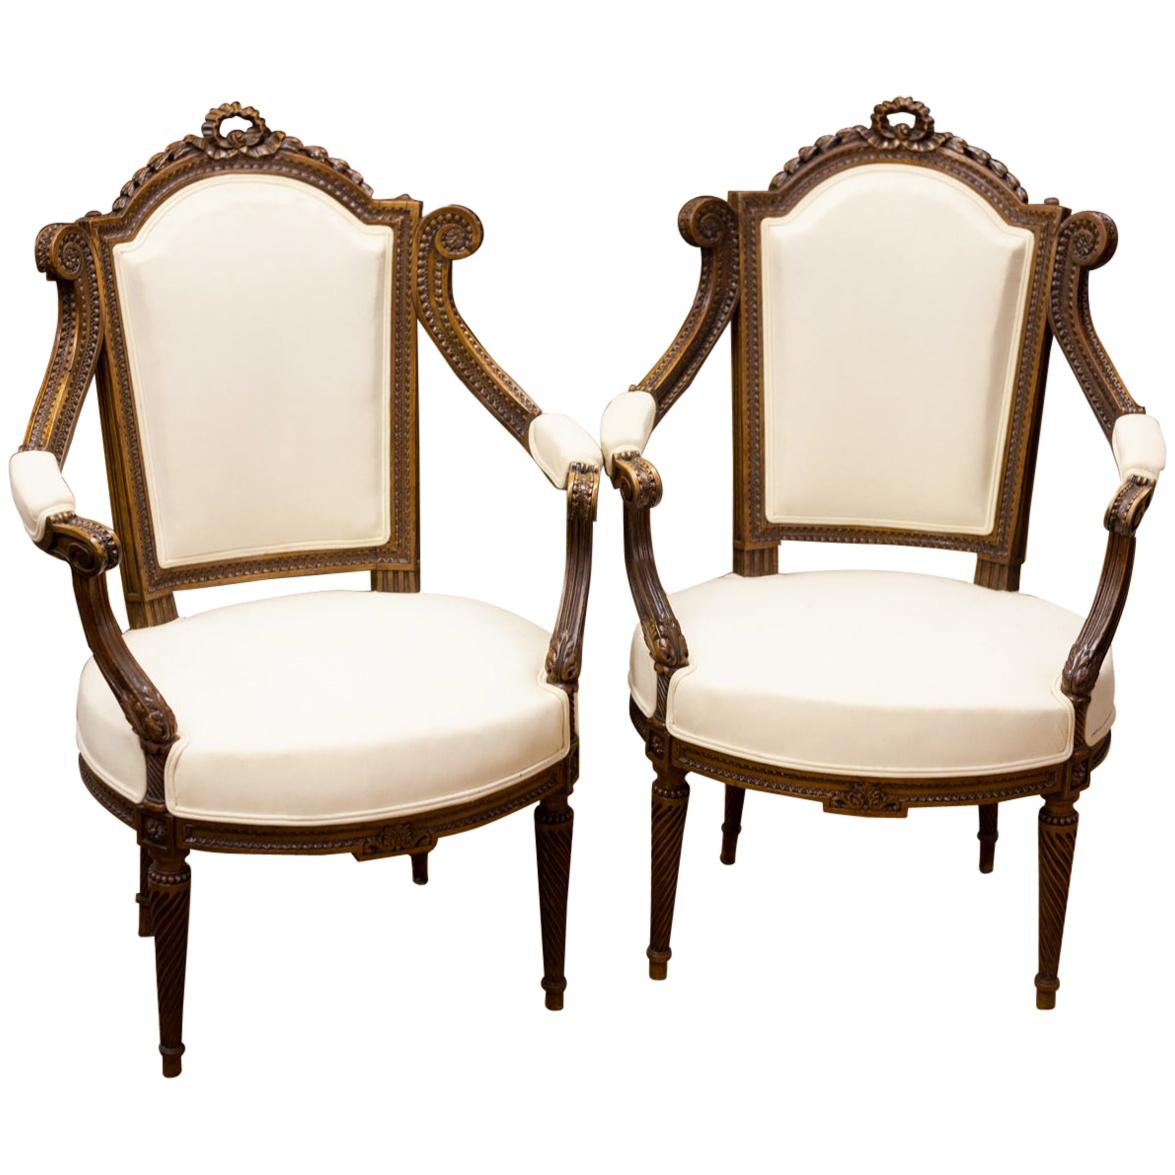 Pair of Carved French Walnut Upholstered Armchairs